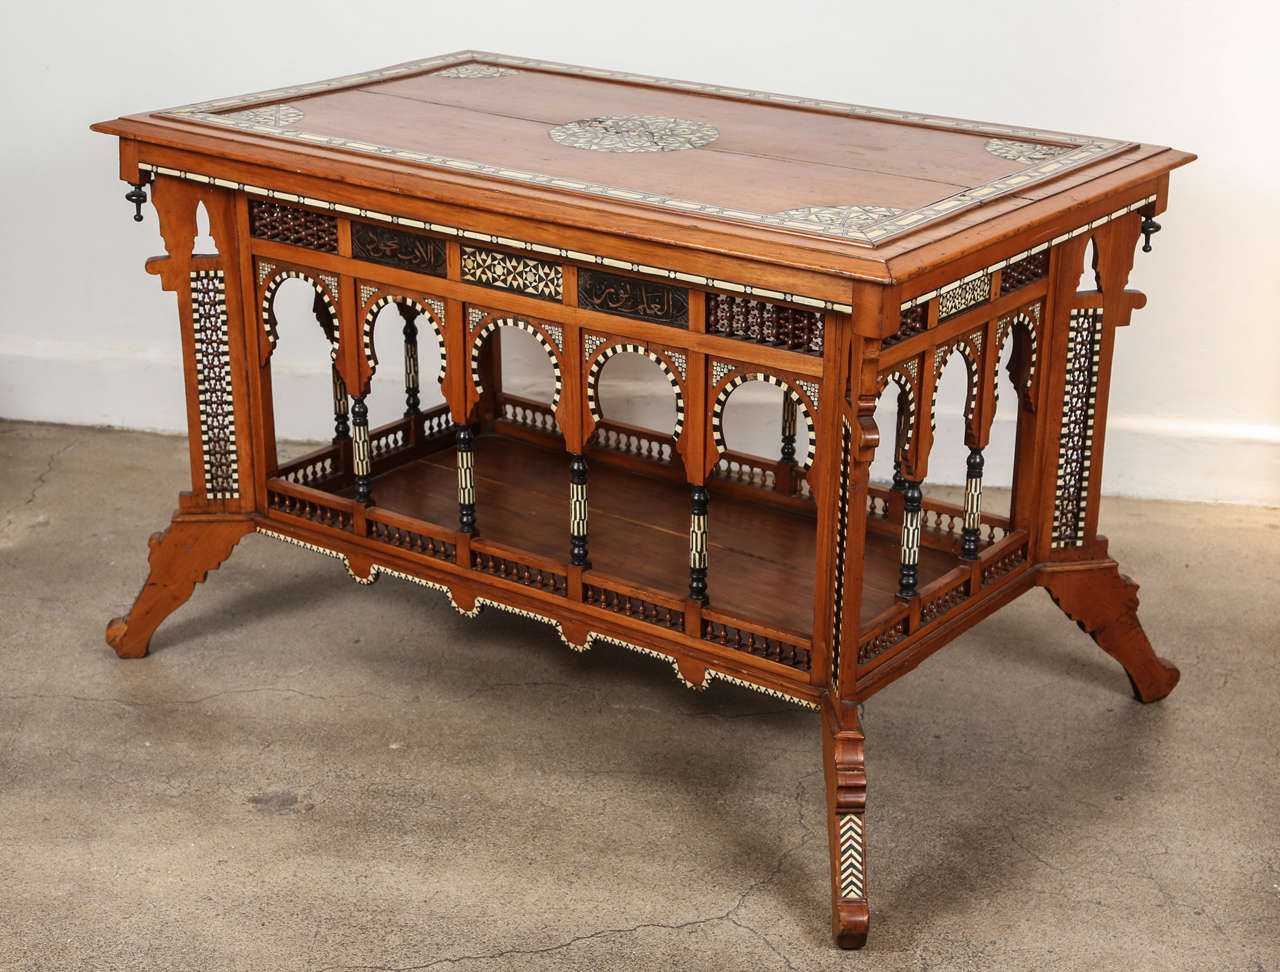 Moorish Middle Eastern Console Table.
Rare console table with Moorish arches inlaid with ebony and bone.
Carlo Bugatti style.
Size of the top is 30